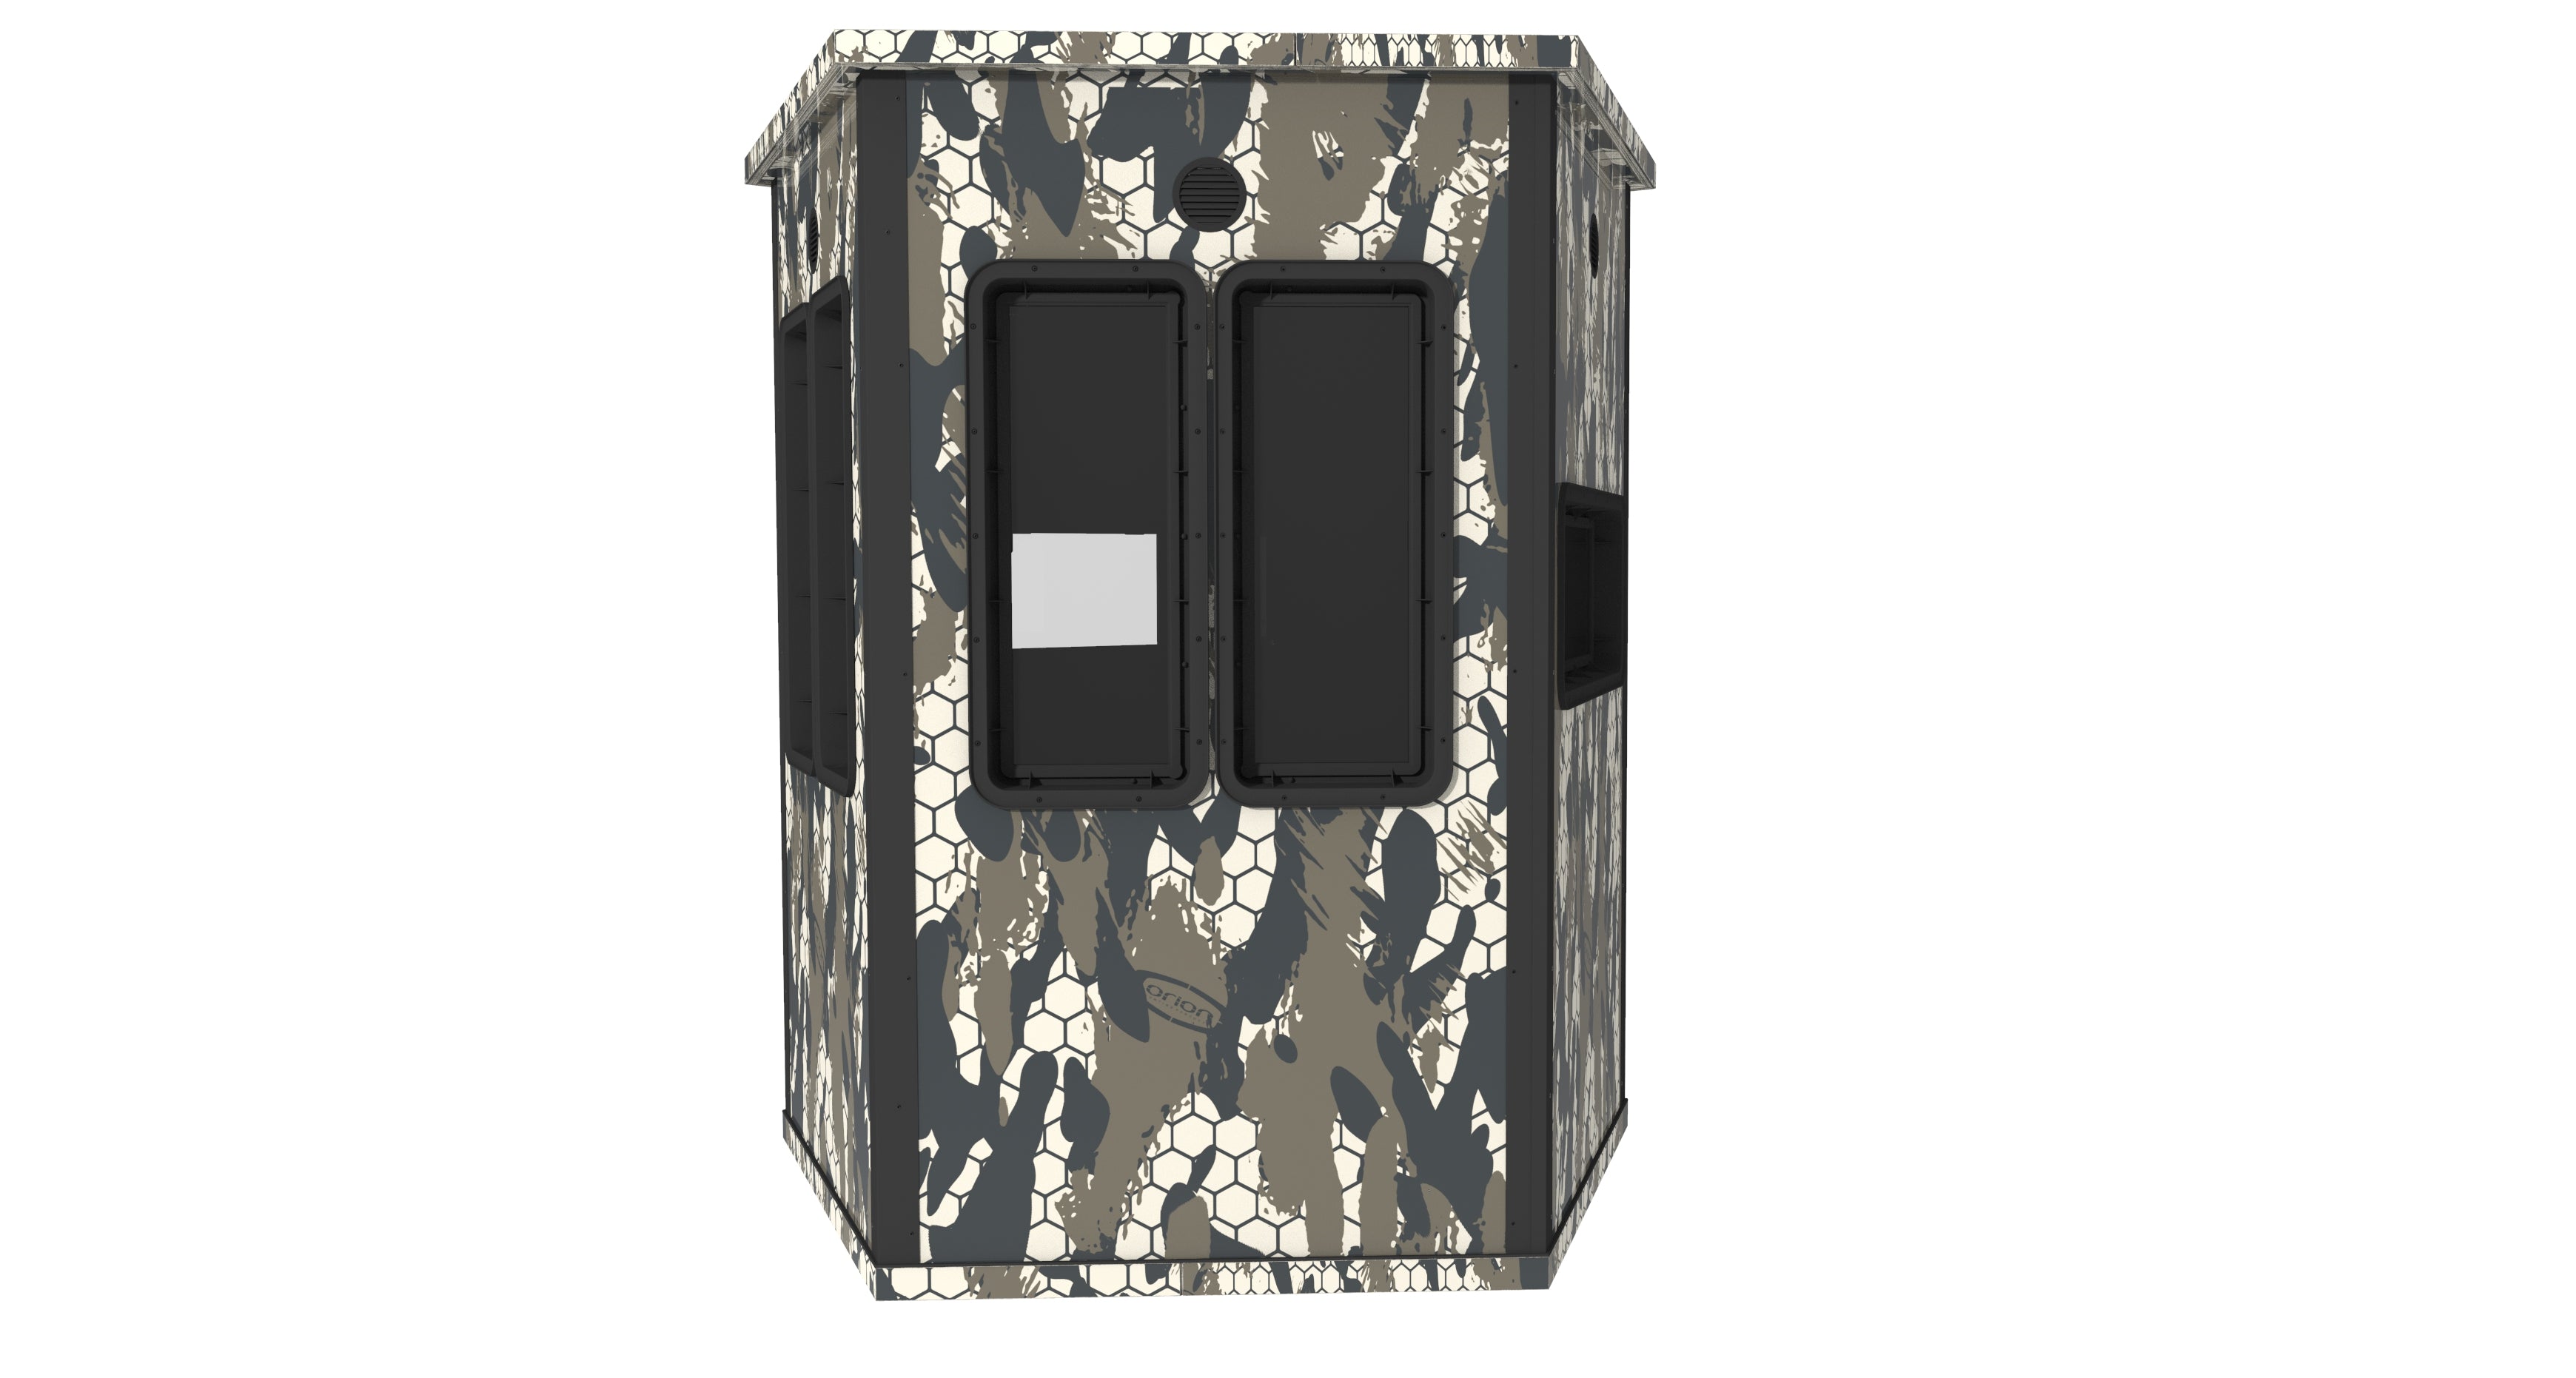 Orion 55VT - Modular Archery Deer Hunting Blind with Tinted Windows